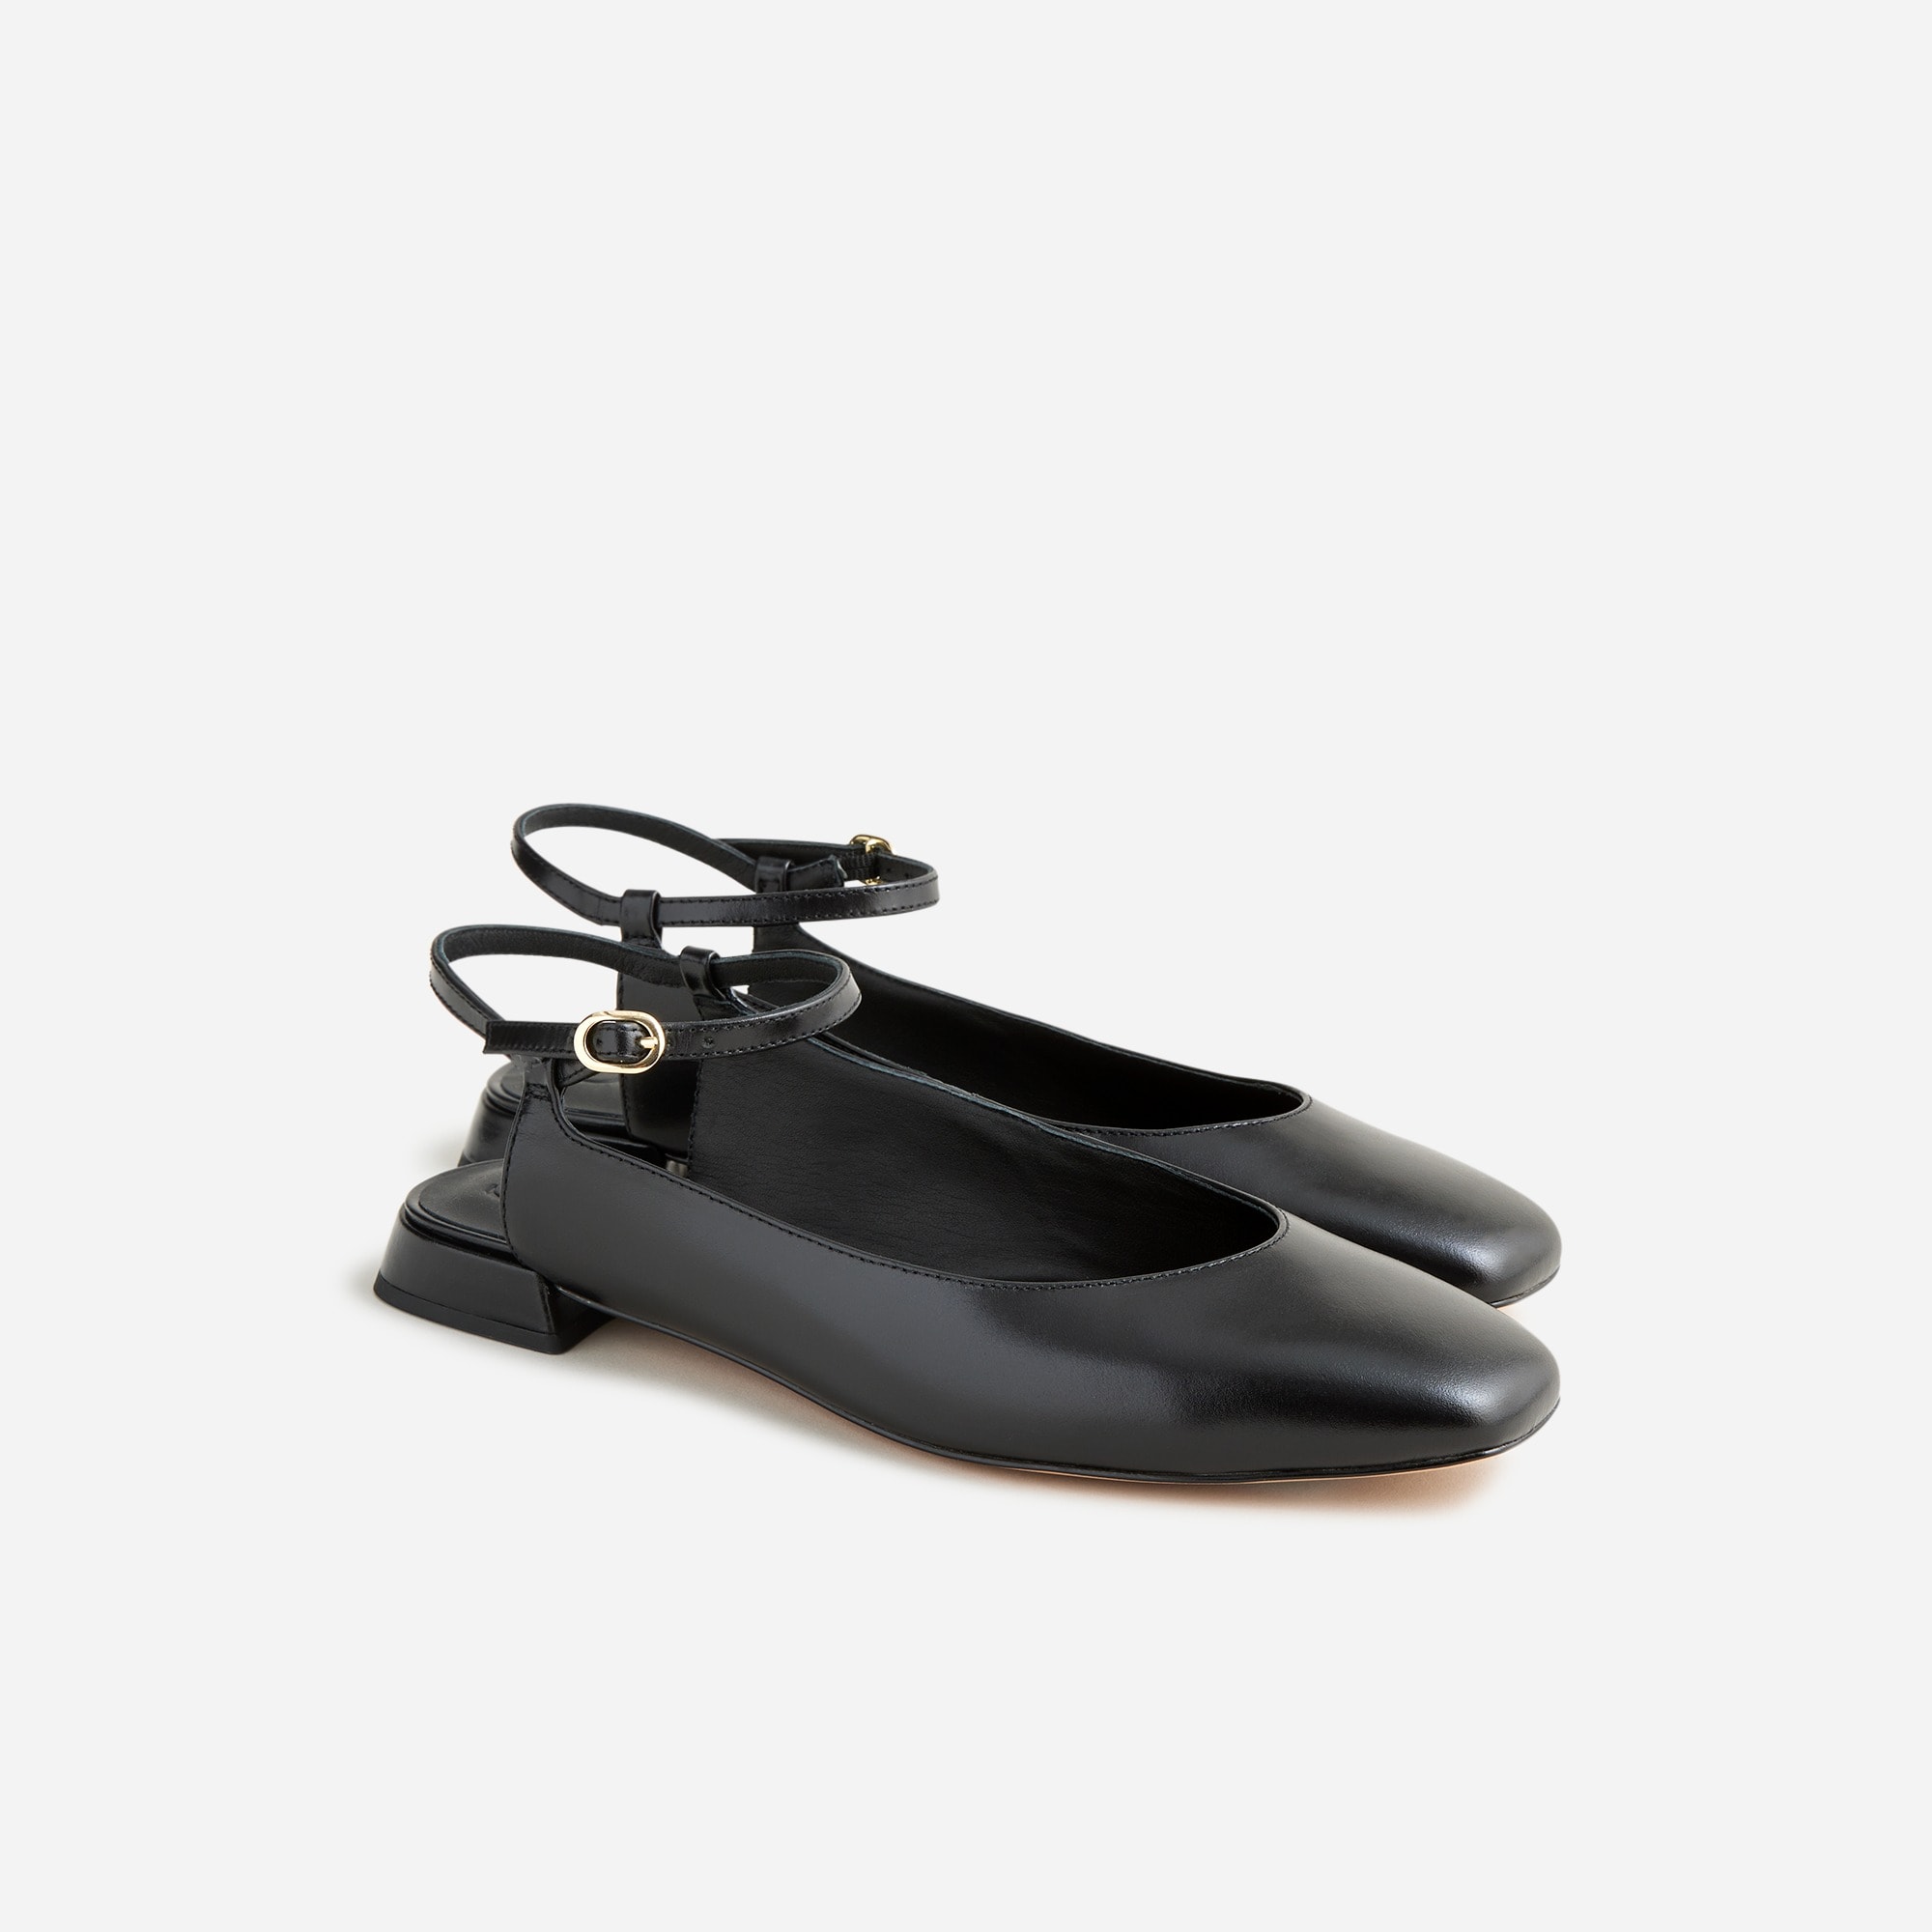  Ankle-strap flats in leather